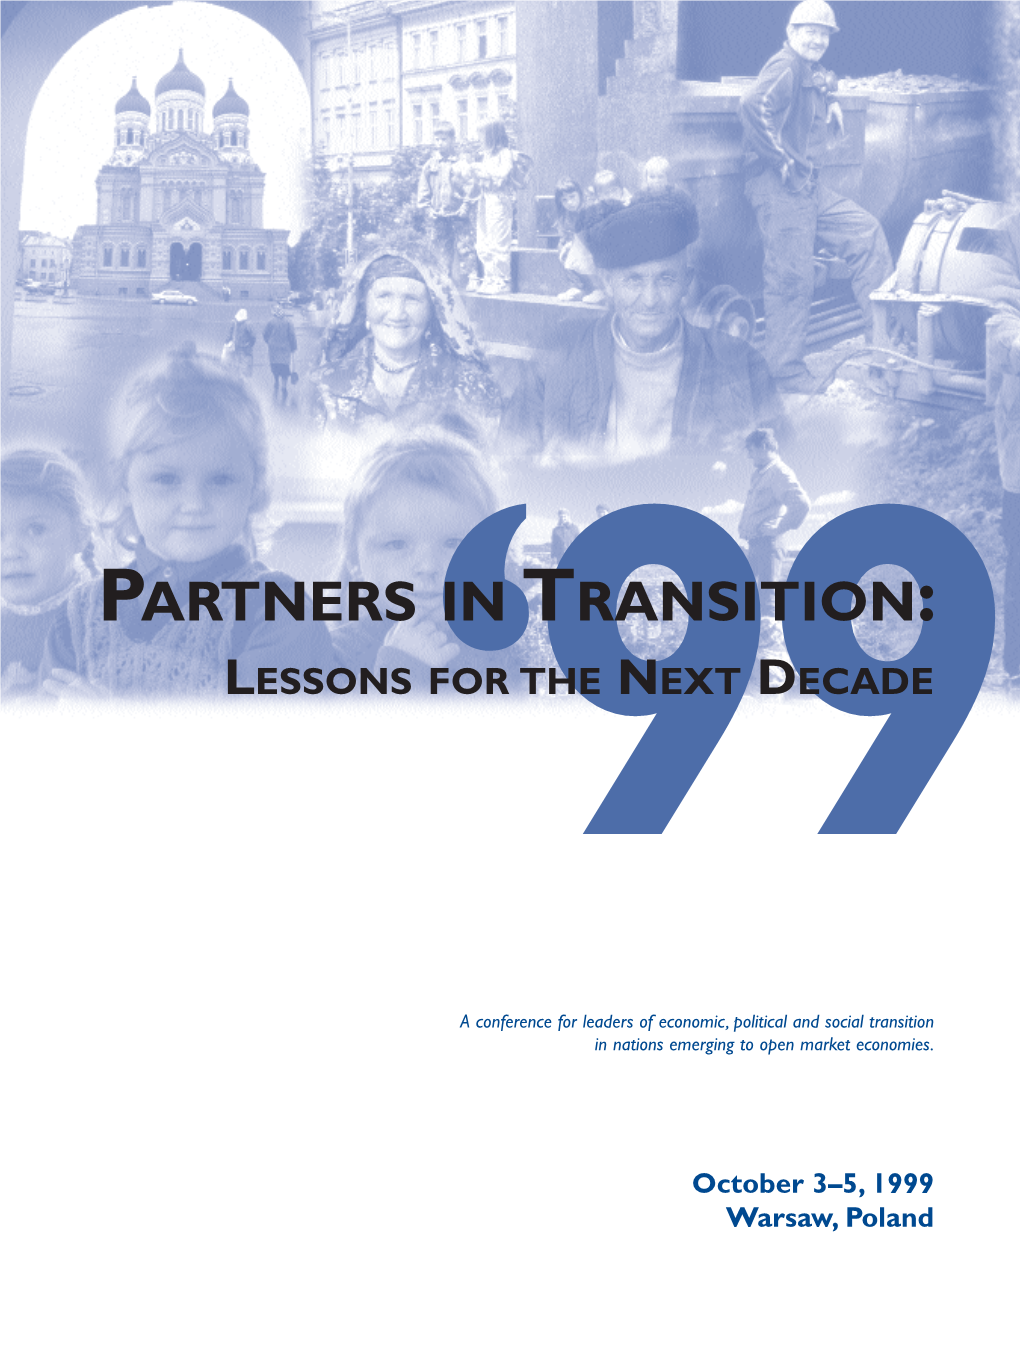 Partners in Transition: Lessons for the Next Decade